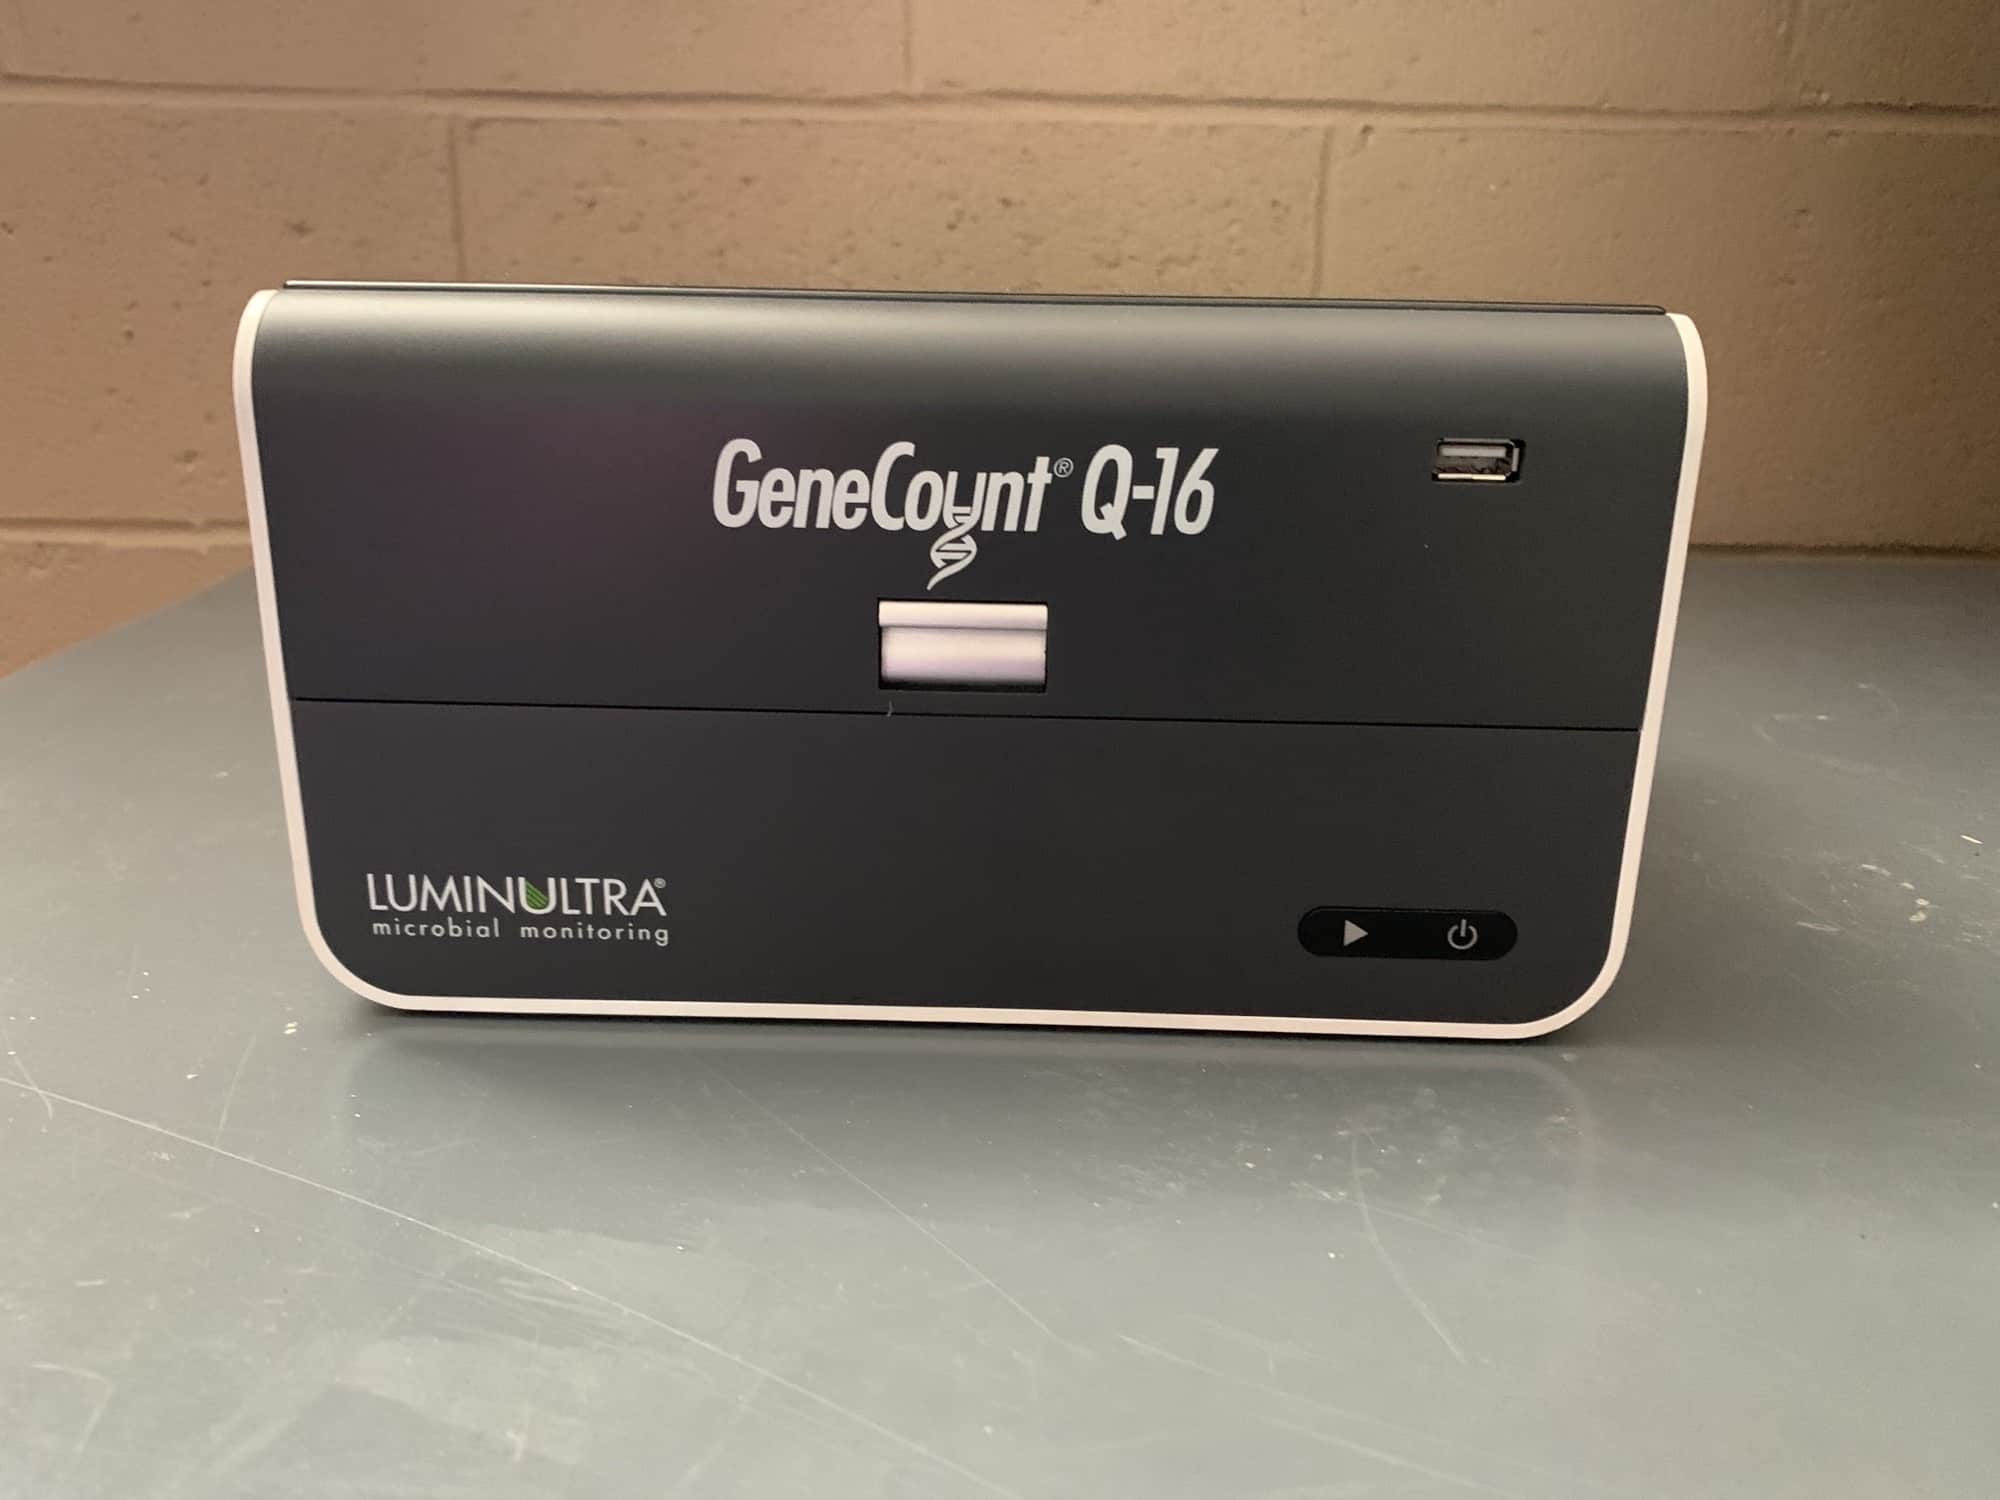 LuminUltra GeneCount qPCR - Microbial Monitoring system